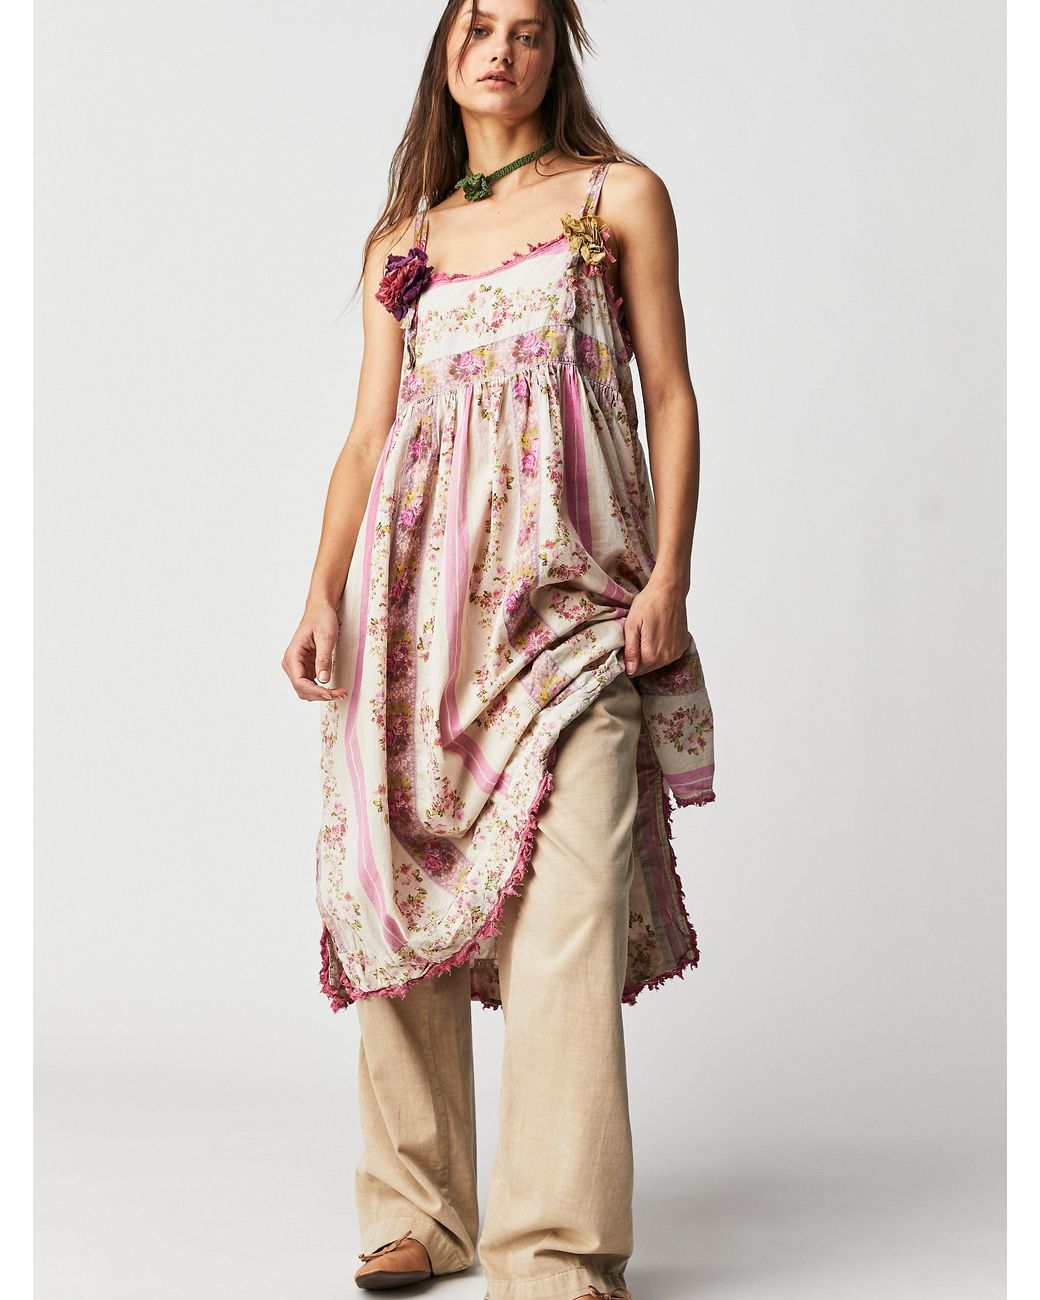 Free People Magnolia Pearl Floral Cotton Dress | Lyst